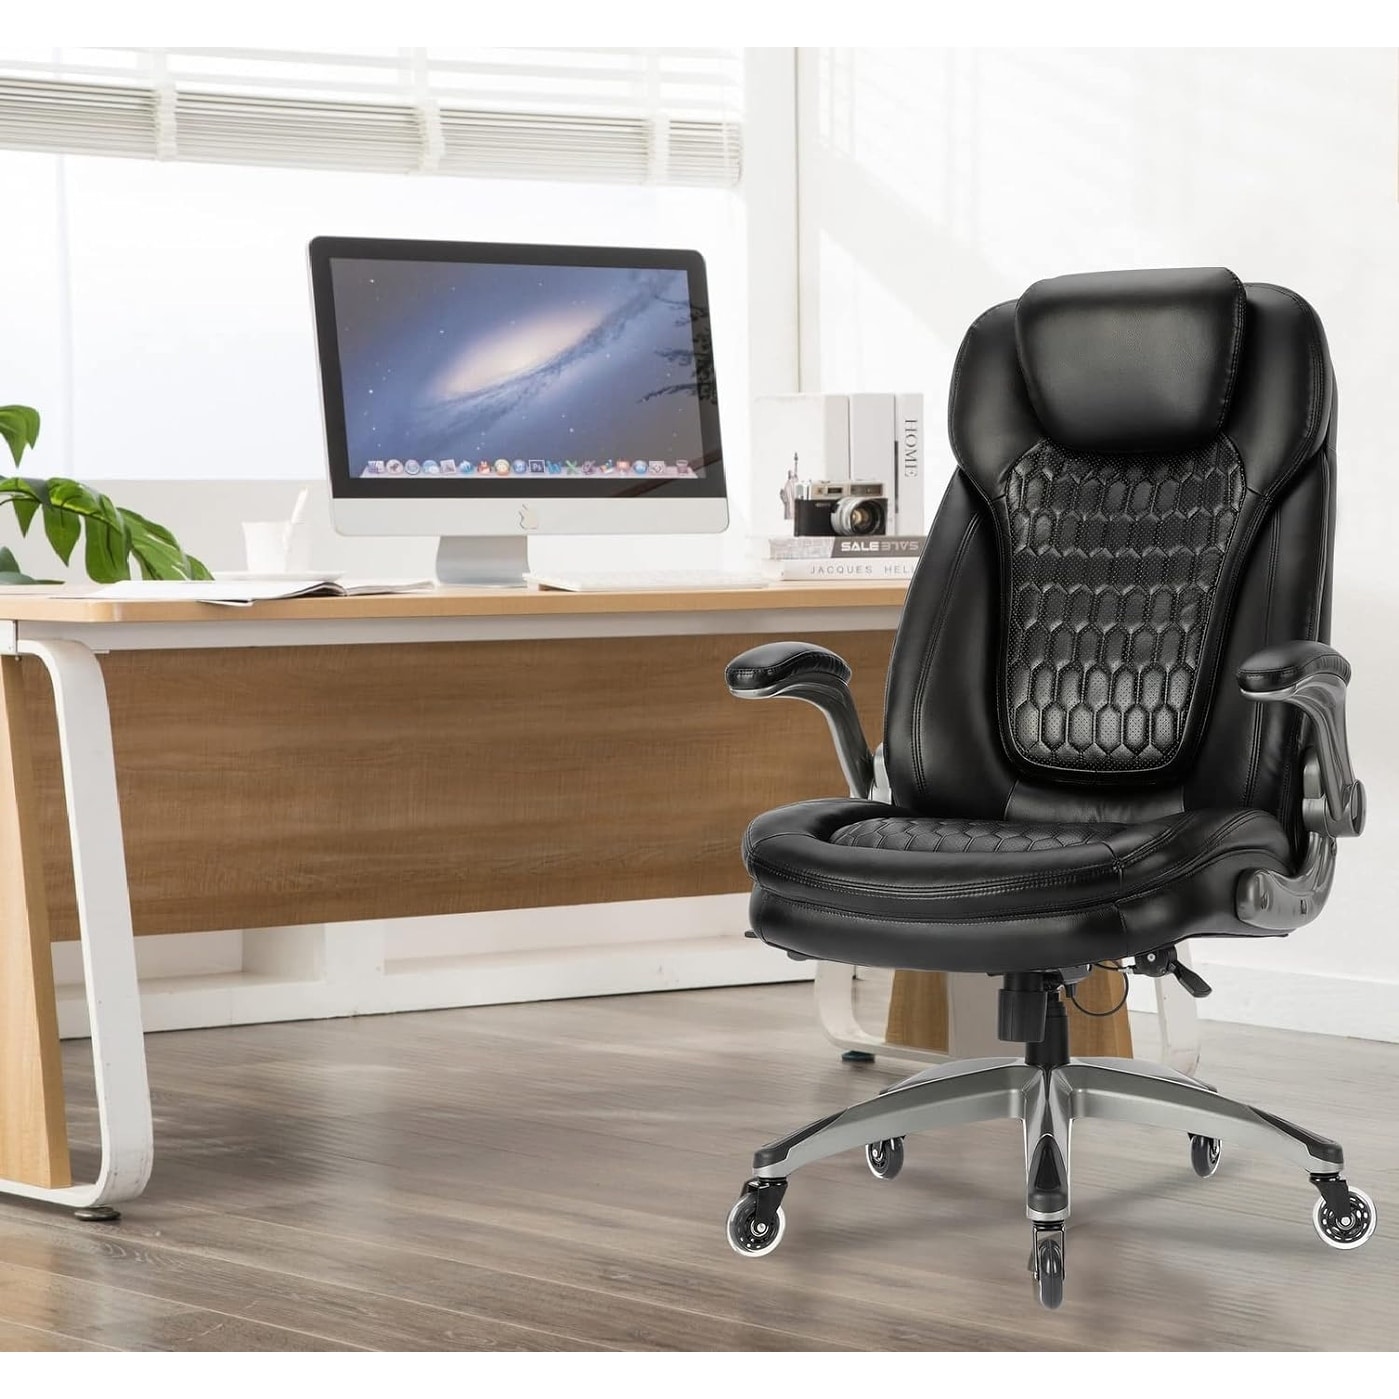 https://ak1.ostkcdn.com/images/products/is/images/direct/f95b4cfcd1aec4dca3a6cb57879a3a35398370c1/Ergonomic-Executive-Swivel-Rolling-Home-Office-Chair-with-Padded-Flip-up-Arms%2C-Adjustable-Tilt-Lock-for-Adult-Working-Study.jpg